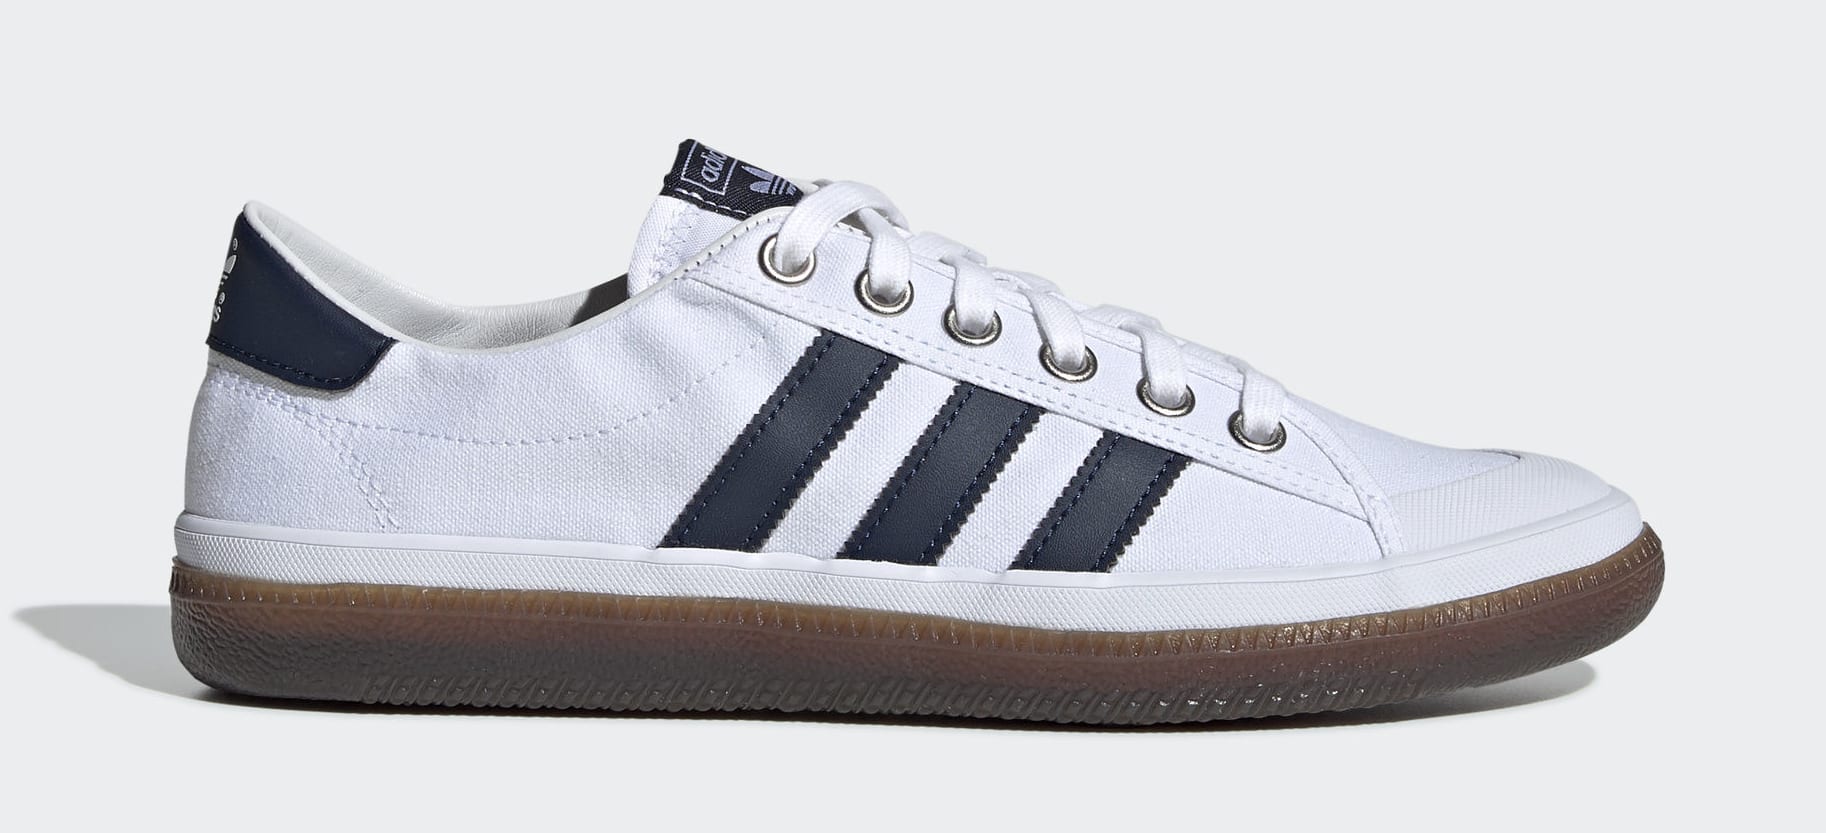 Adidas Norfu Spezial Lateral F35719